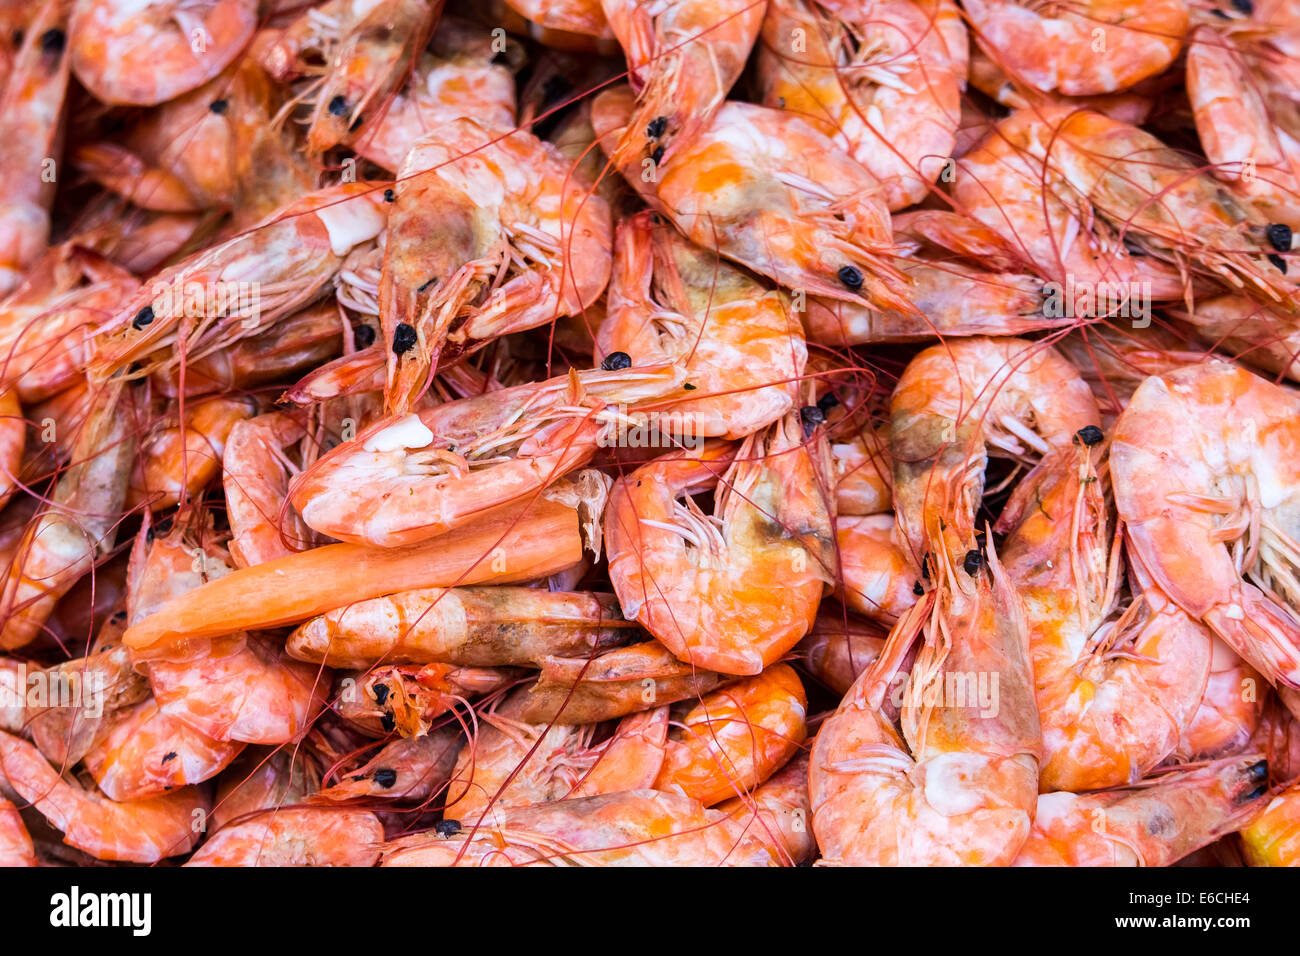 Cooked shrimps, delicious and healthy seafood. Shrimp are crustaceans (just like lobsters and crabs) Stock Photo